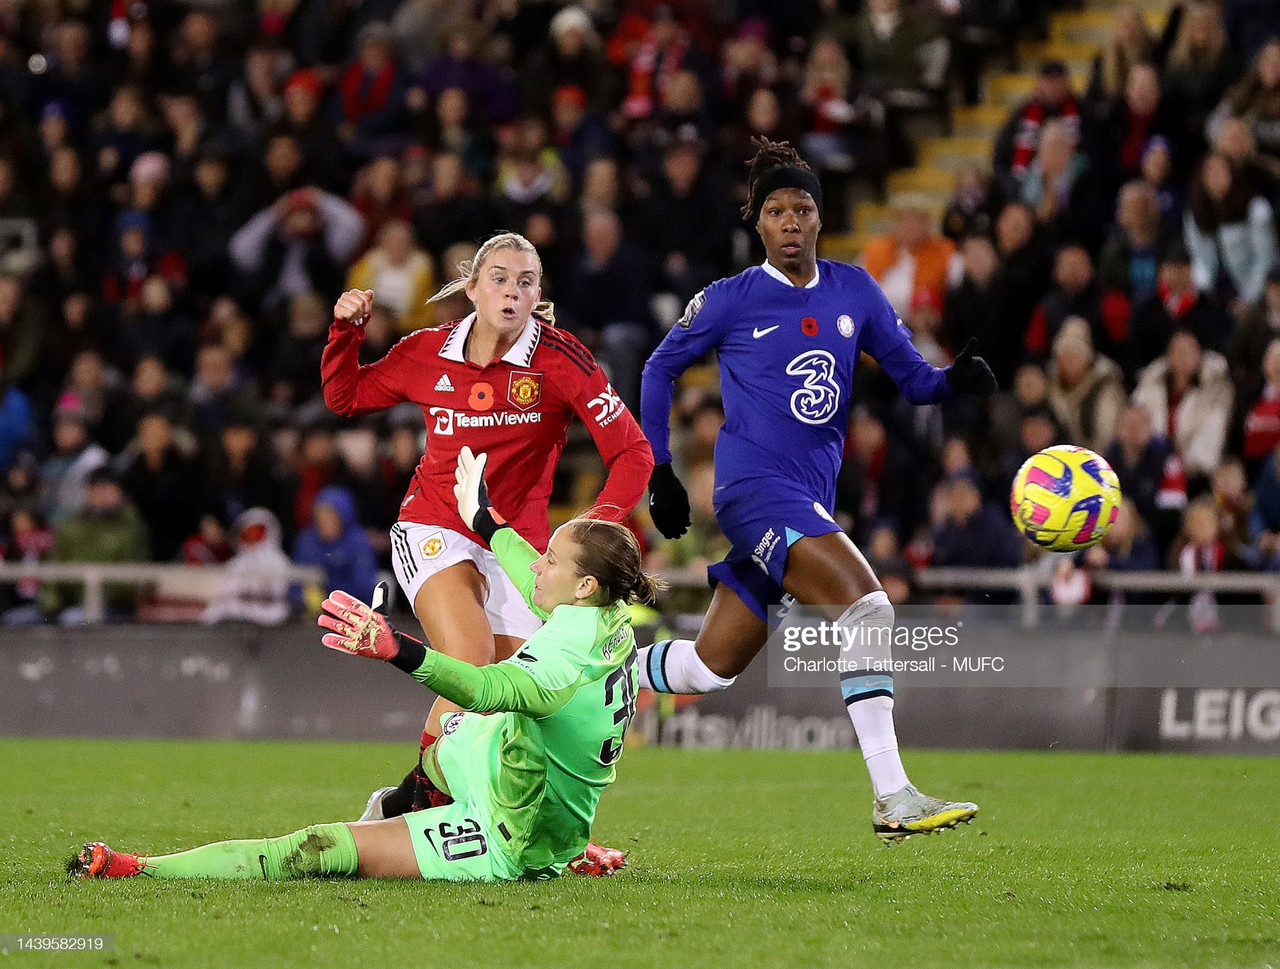 Chelsea vs Manchester United: Women's Super League Preview, Gameweek 15, 2023